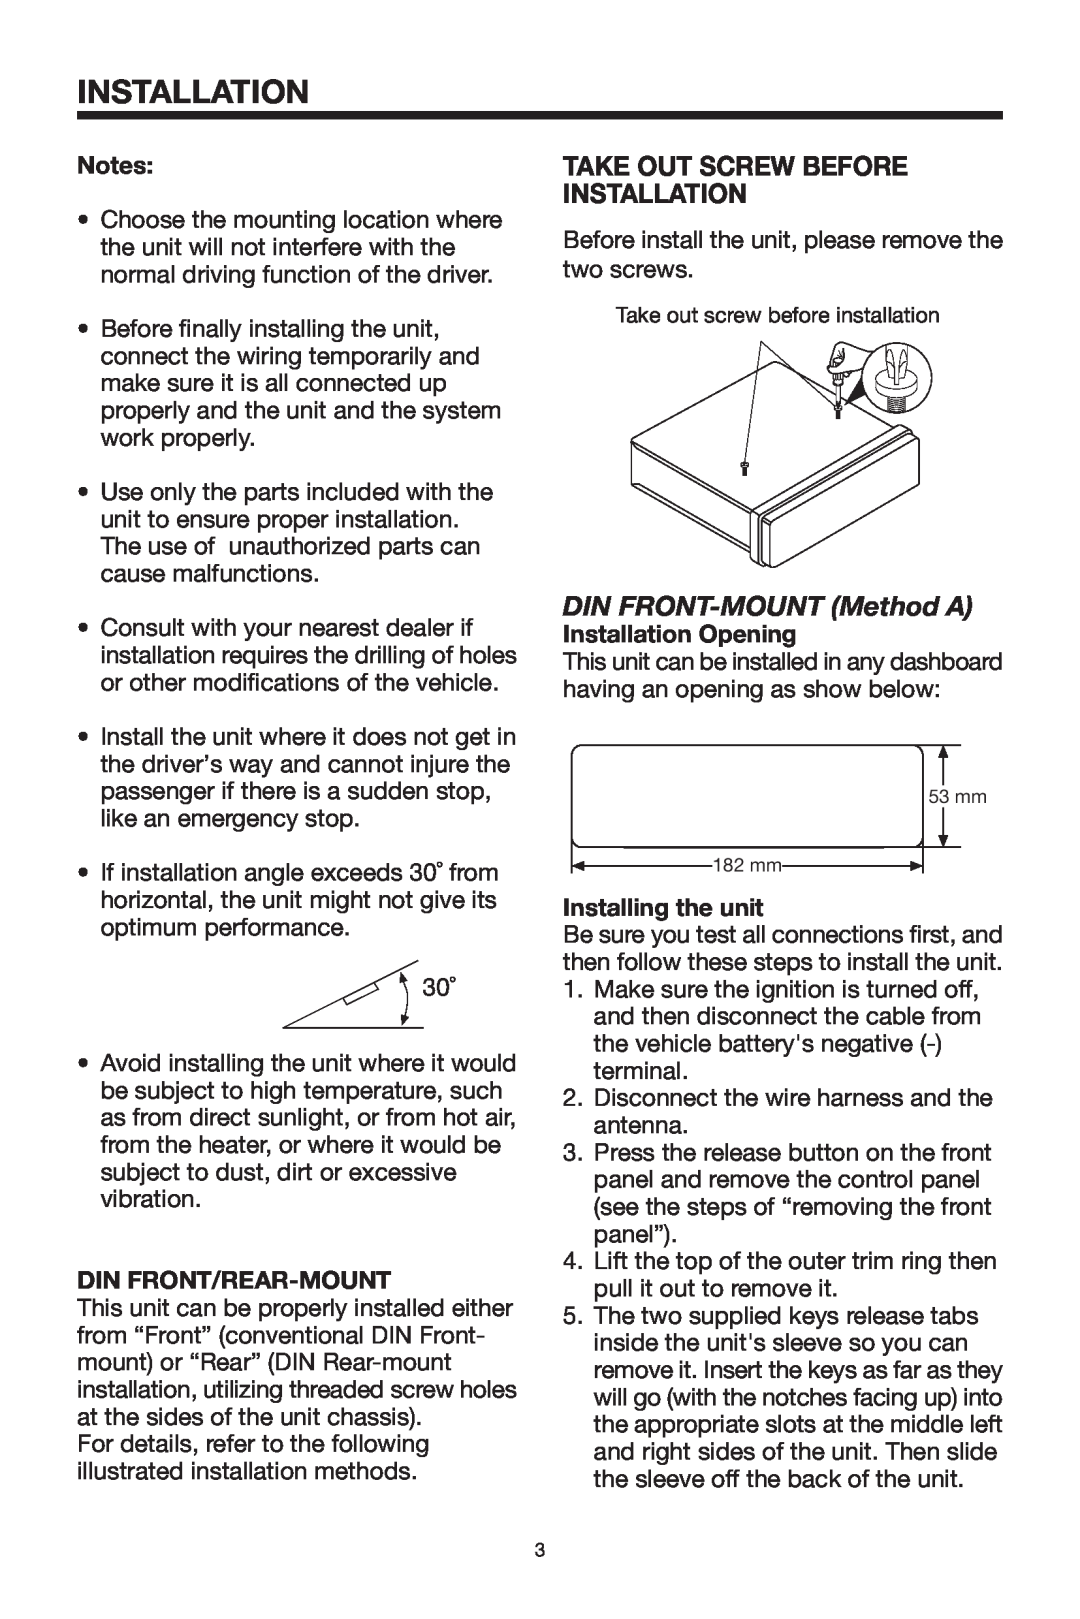 PYLE Audio PLCD14MRKT owner manual Take Out Screw Before Installation, DIN FRONT-MOUNT Method A 